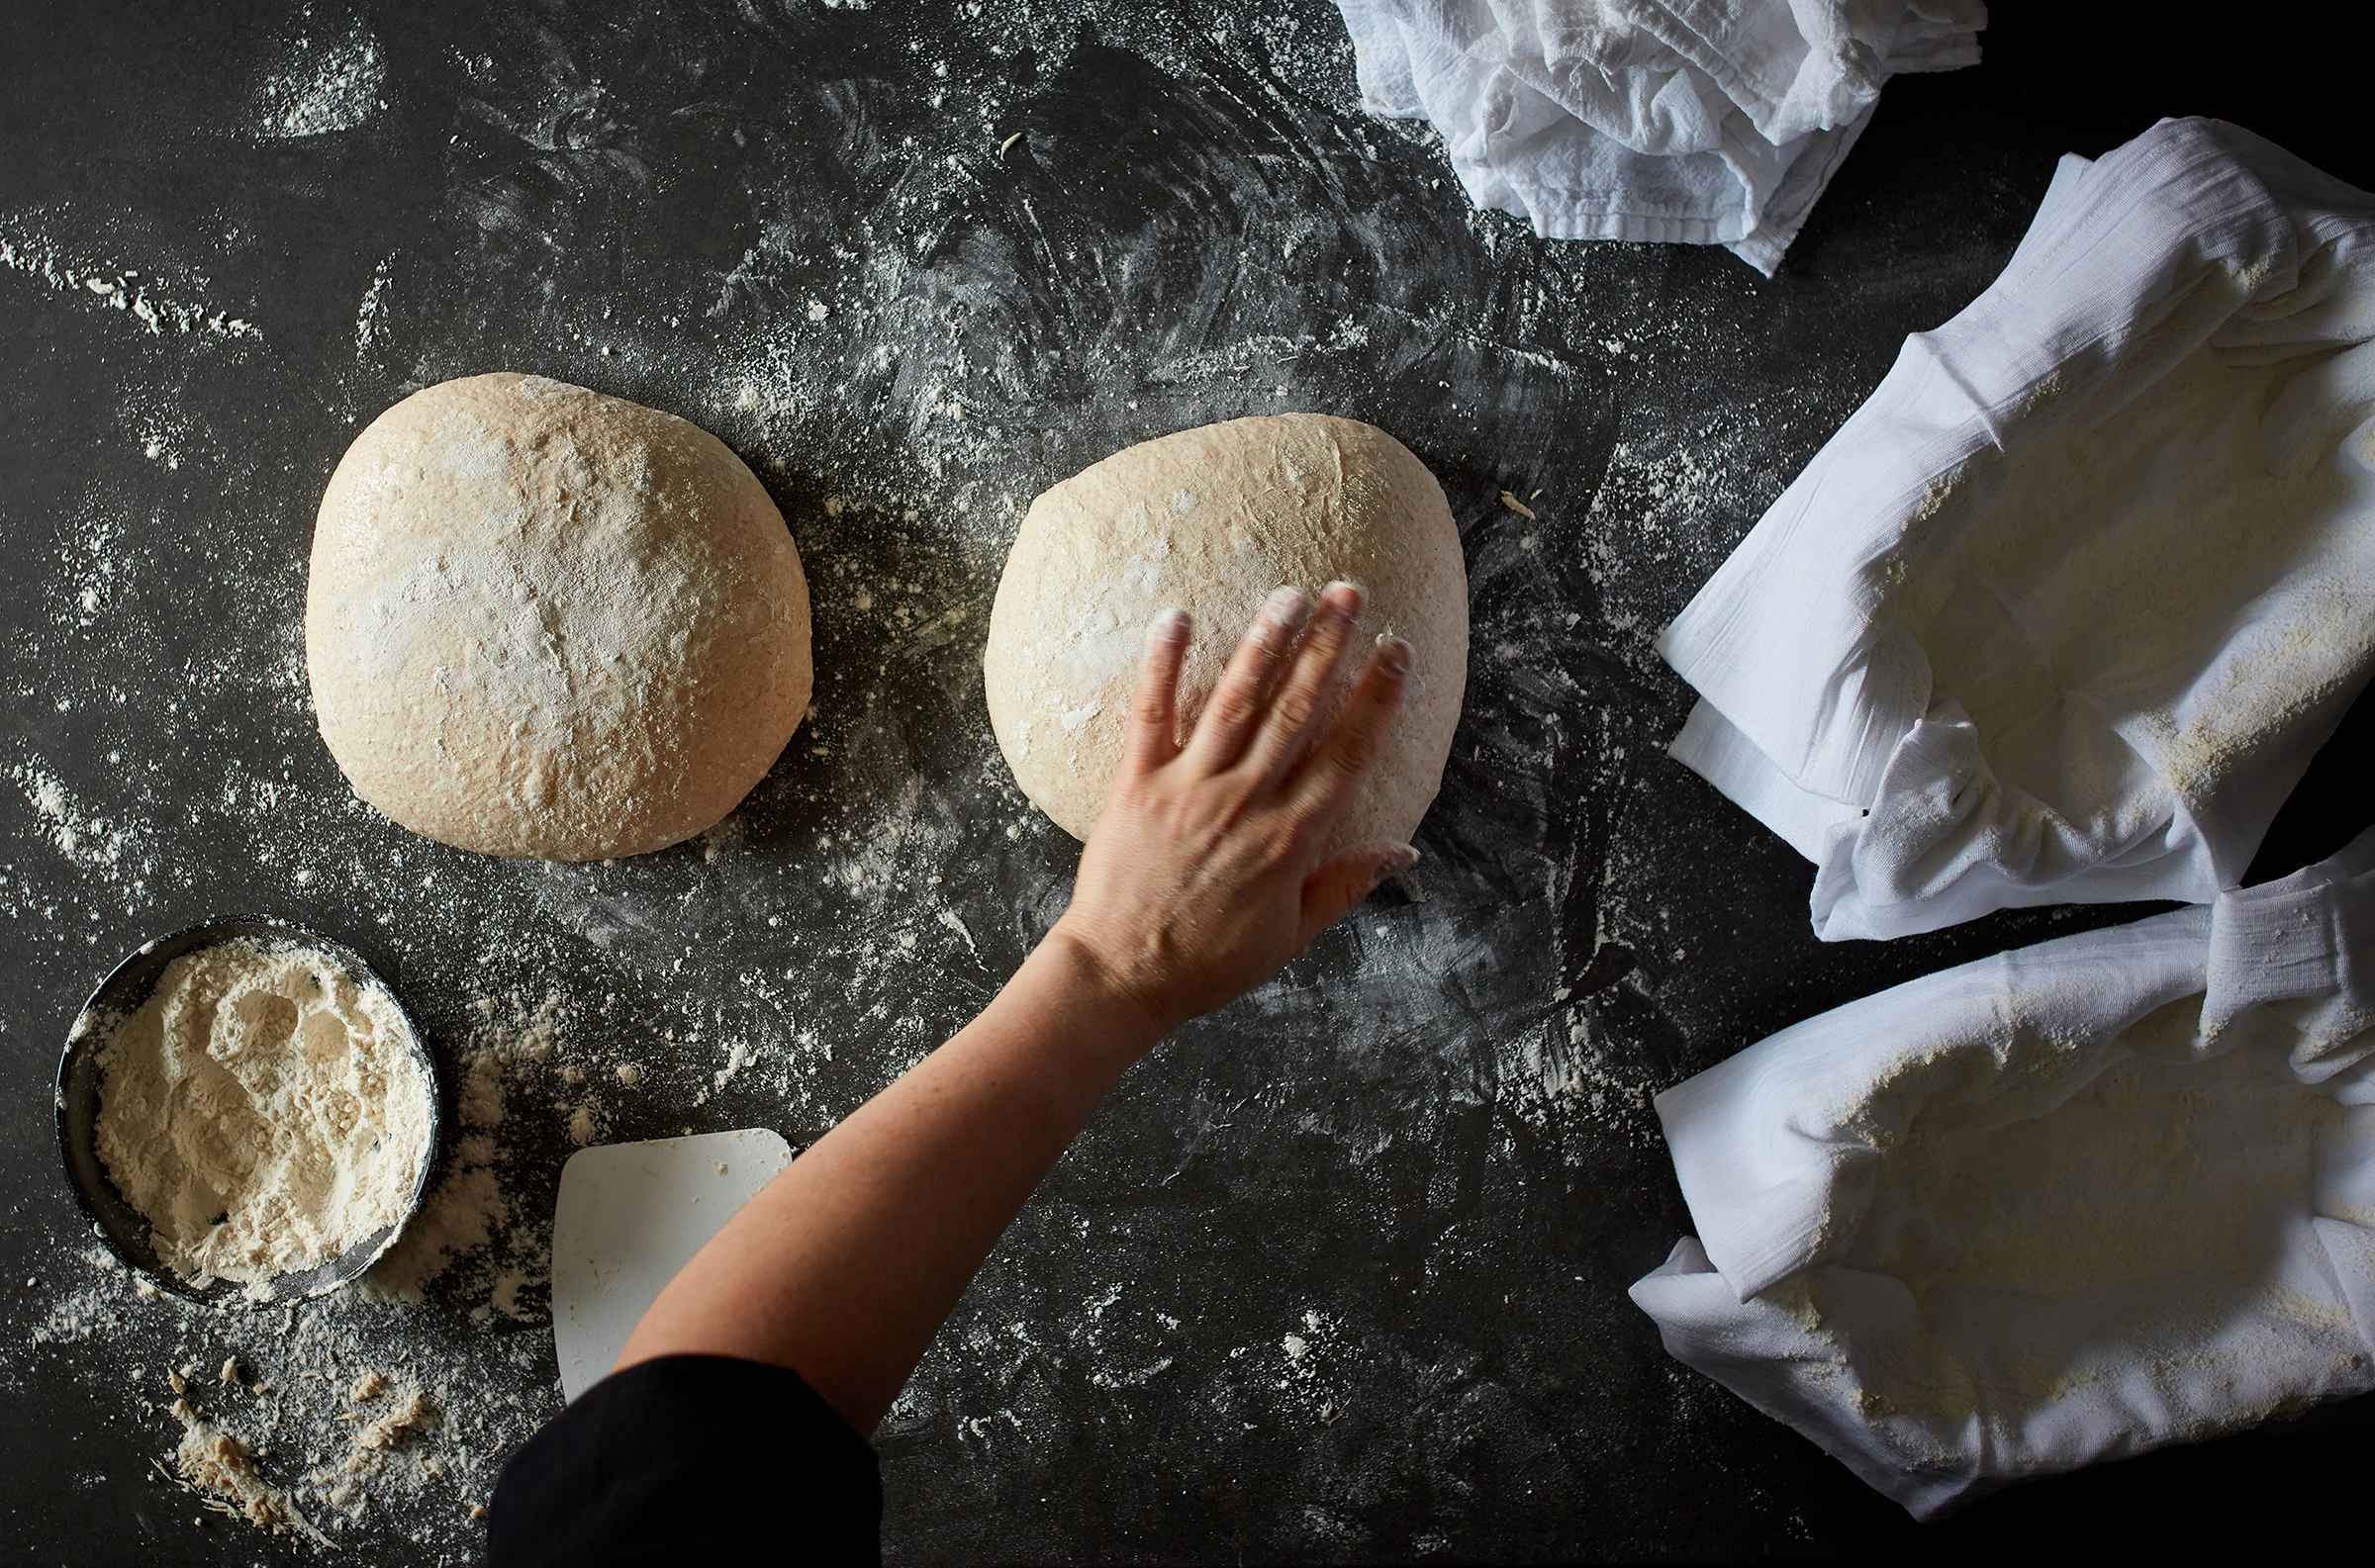 Dough is shaped for sourdough bread in New York, on Sept. 10, 2019. (Johnny Miller—The New York Times/Redux)